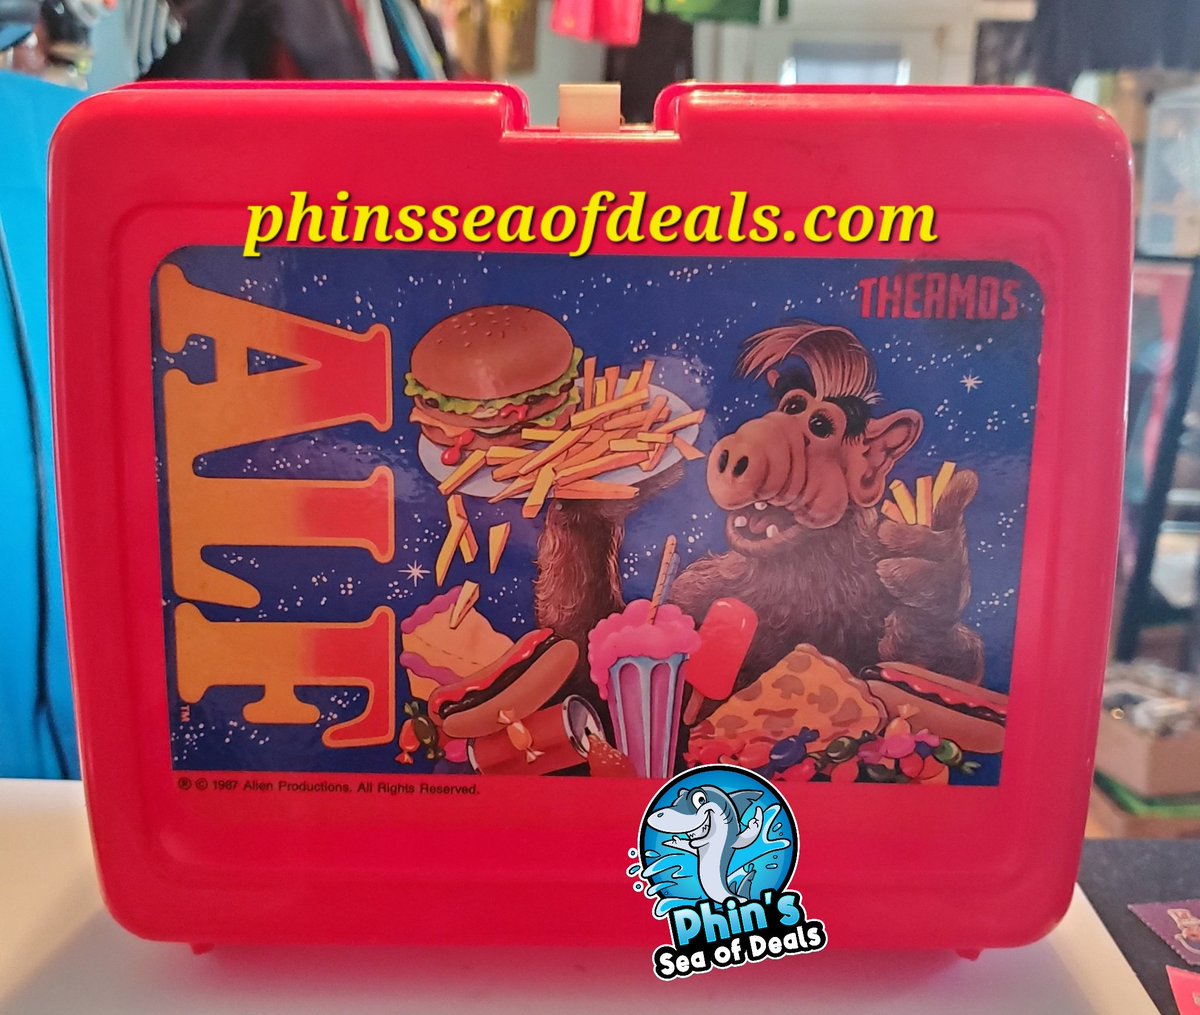 ALF fans
Interested? Send me a message
1987 plastic lunchbox
No thermos

Phinsseaofdeals.com 

#alf #alftoys #alflunchbox #80stoys #80stv #80sshows #lunchboxcollection #lunchboxcollector #vintagelunchboxcollection #vintagelunchbox  #pittsburghsmallbusiness #Pittsburgh